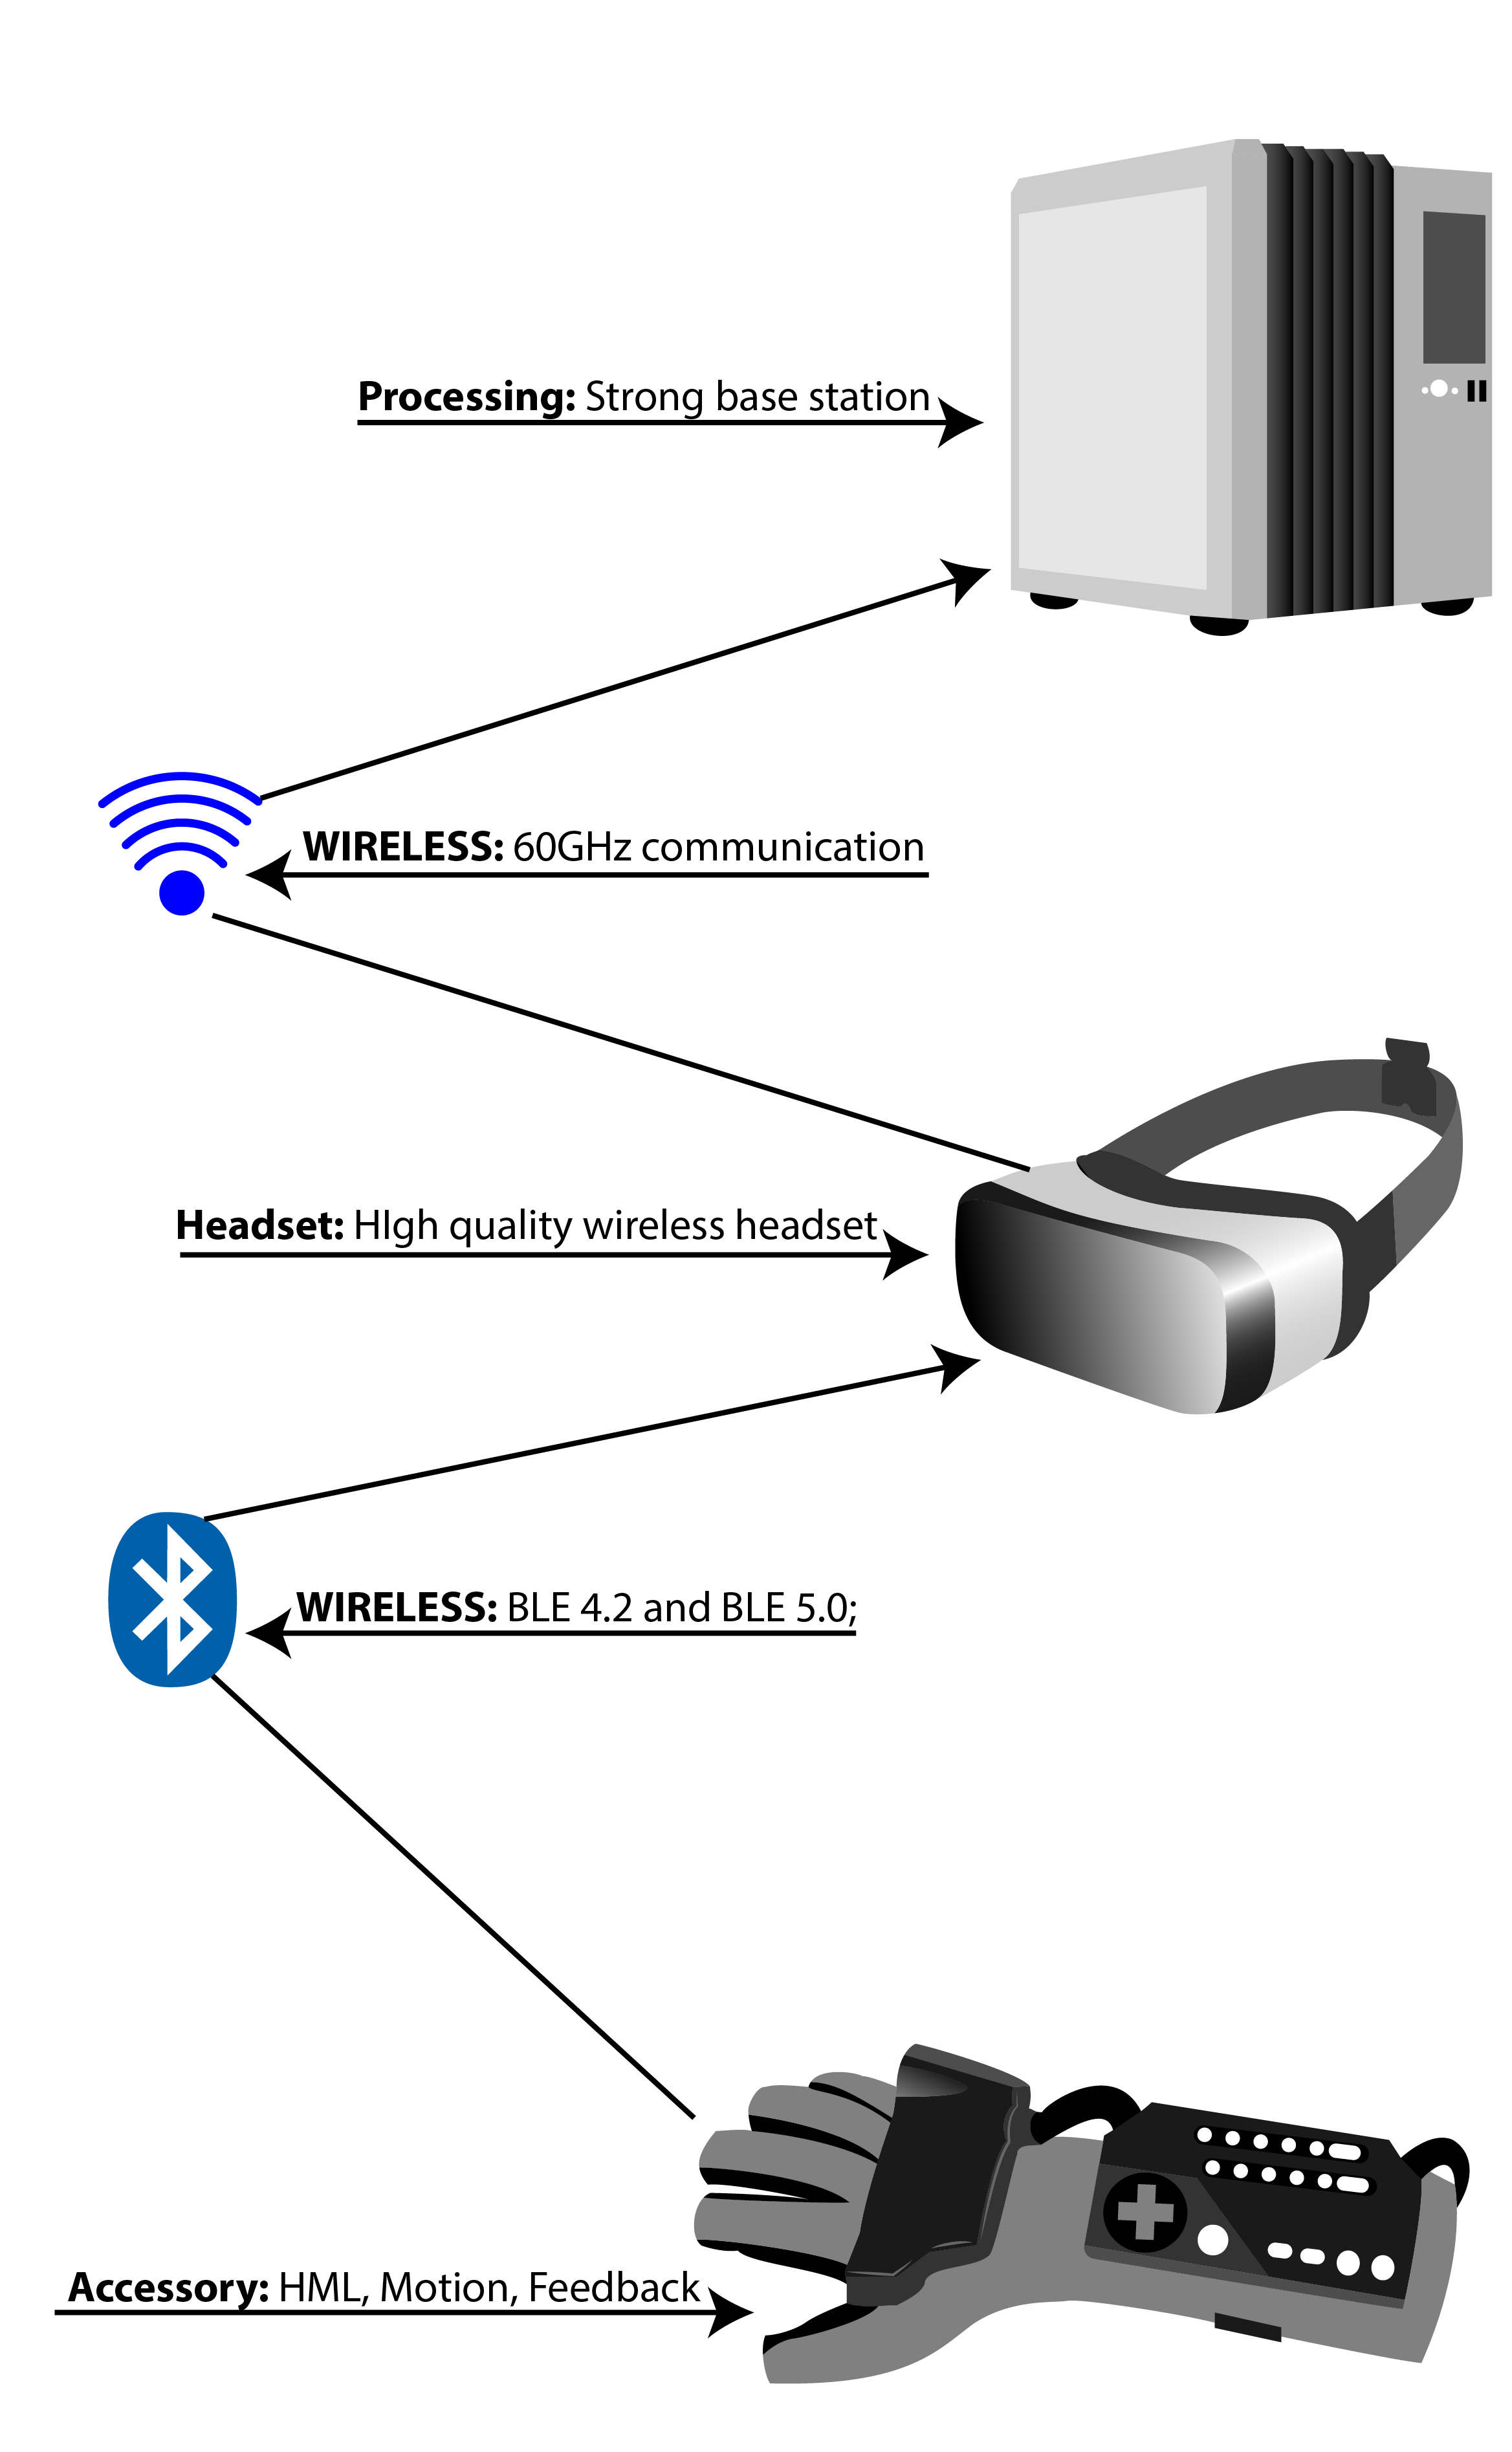 VR and IoT